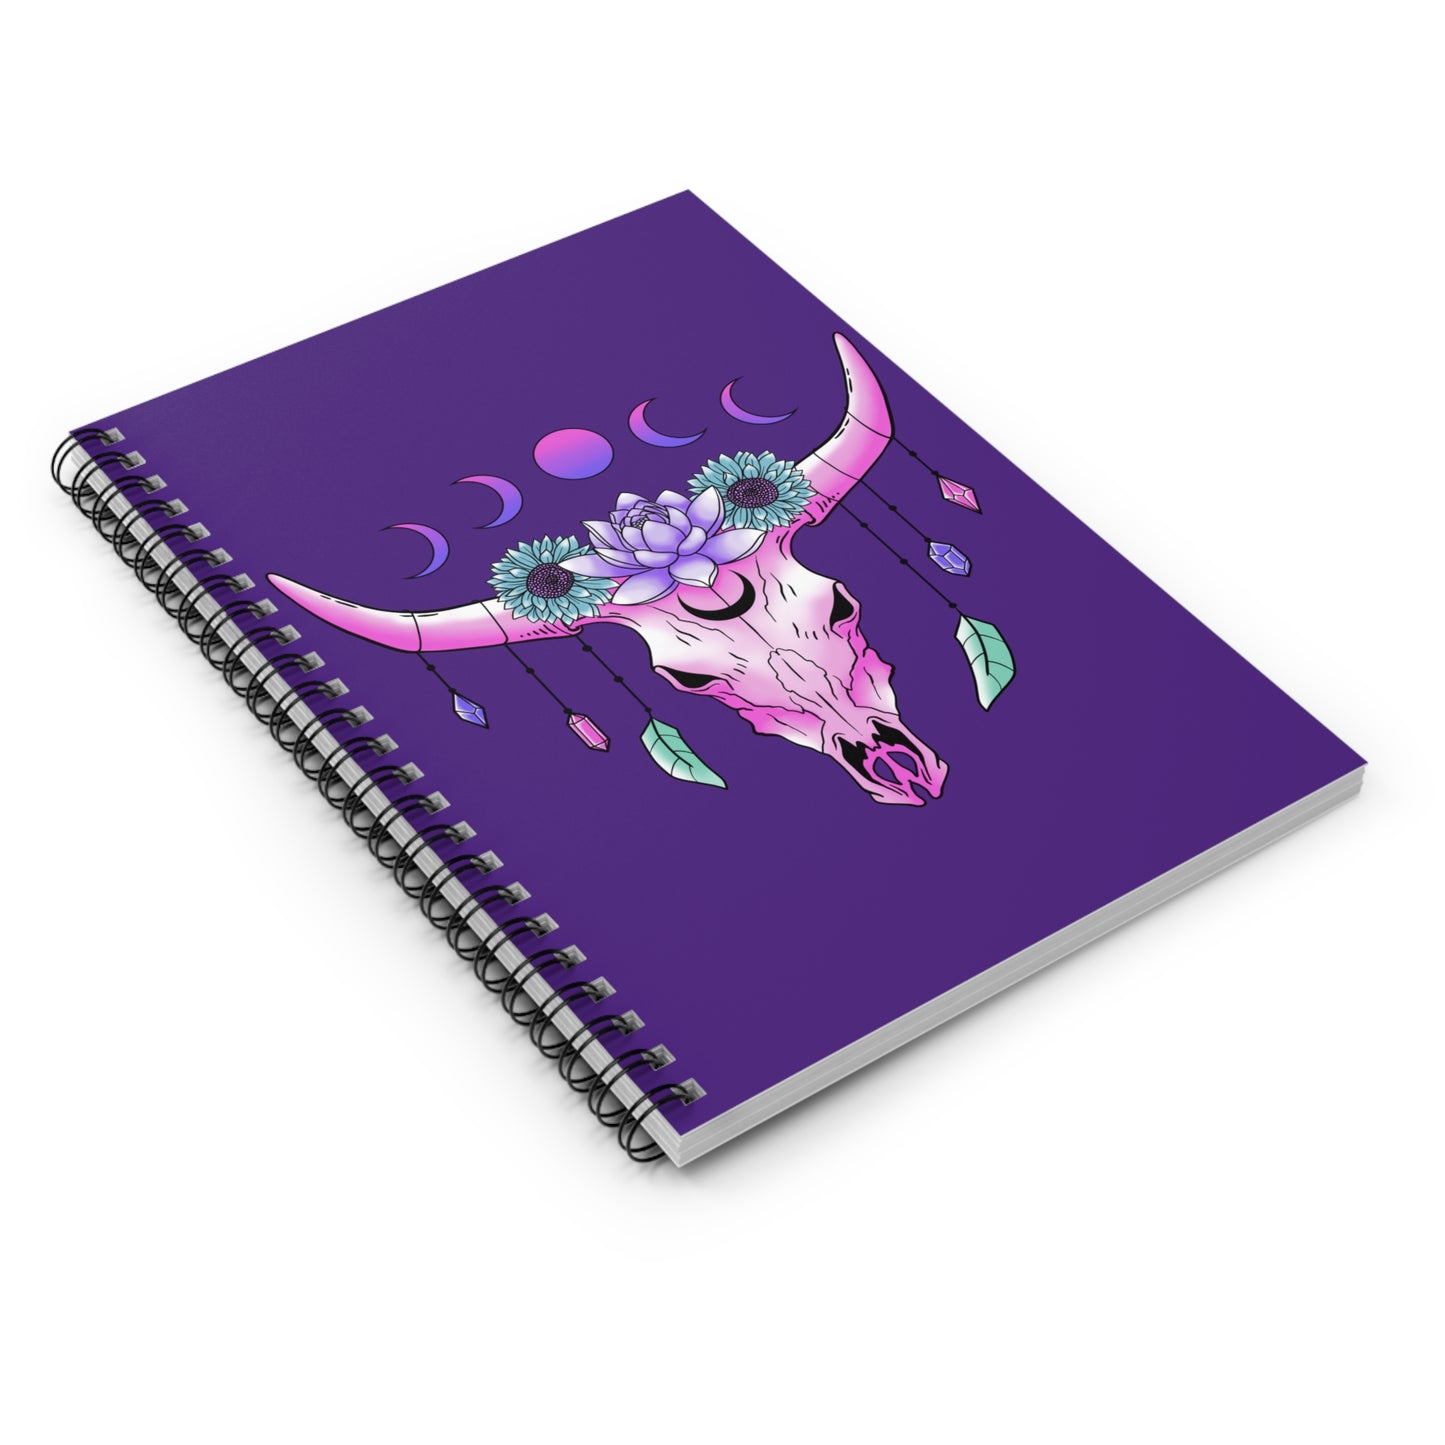 Mystic Moon Phase - I Love You: Spiral Notebook - Log Books - Journals - Diaries - and More Custom Printed by TheGlassyLass